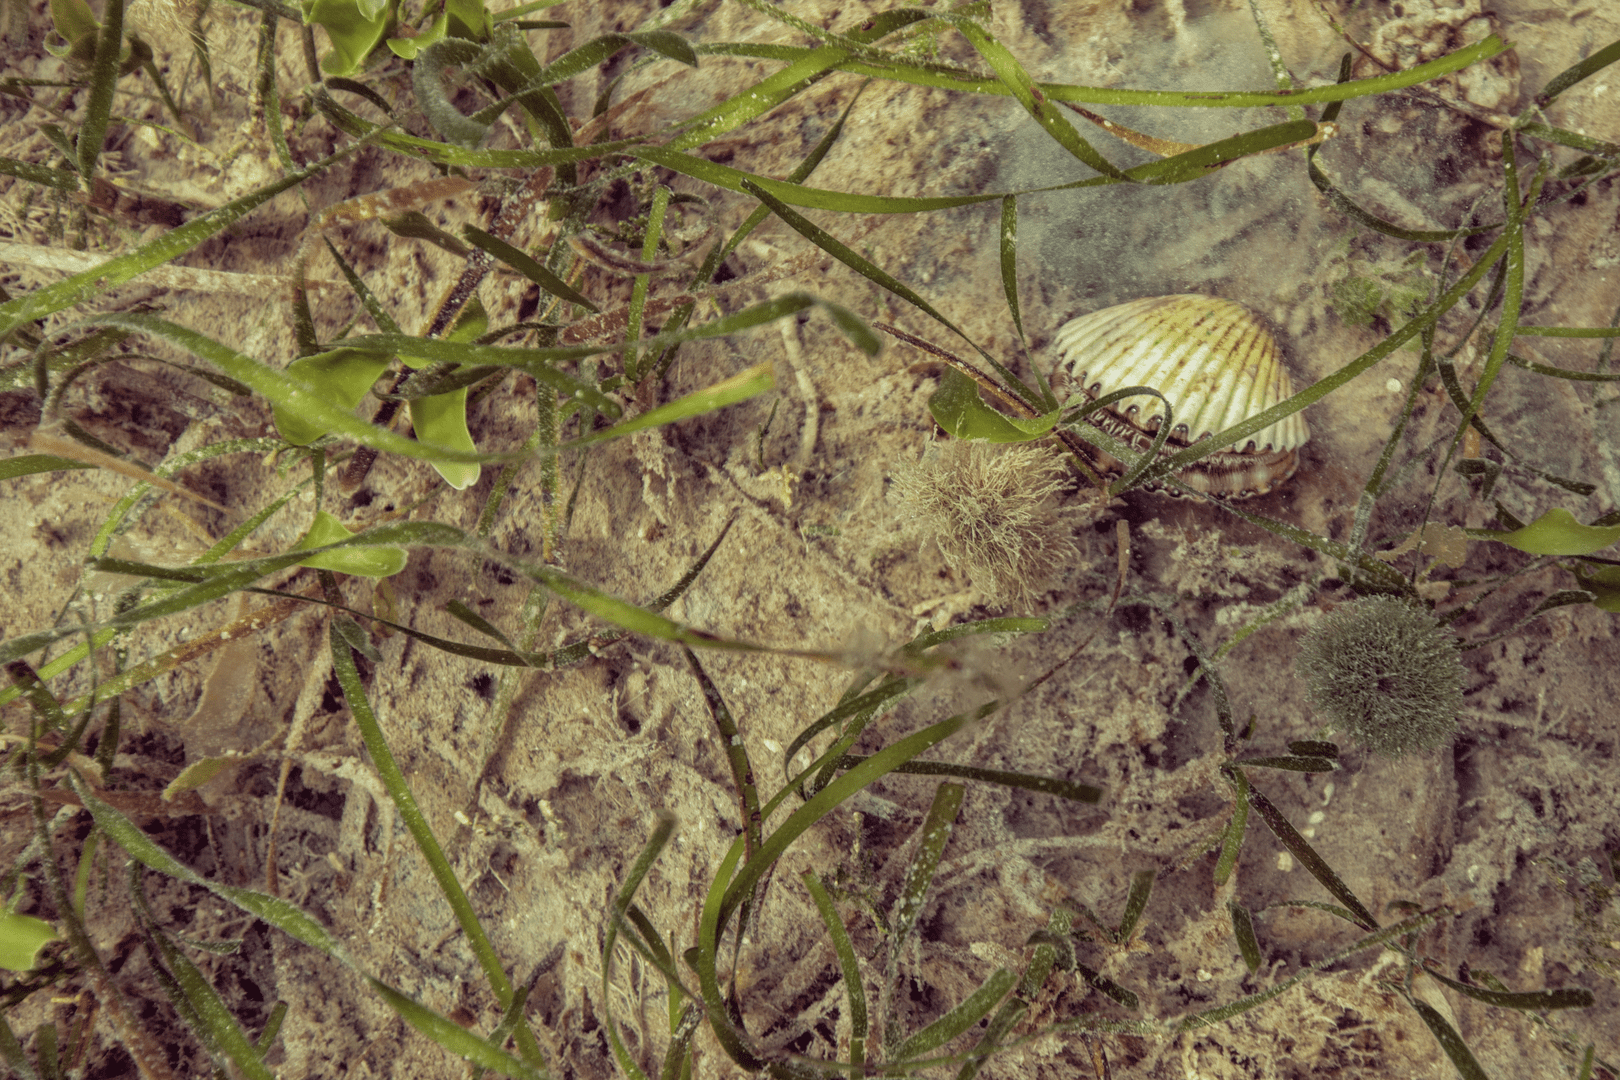 Scallops are found throughout the Nature Coast region in shallow depths, growing among the seagrass.